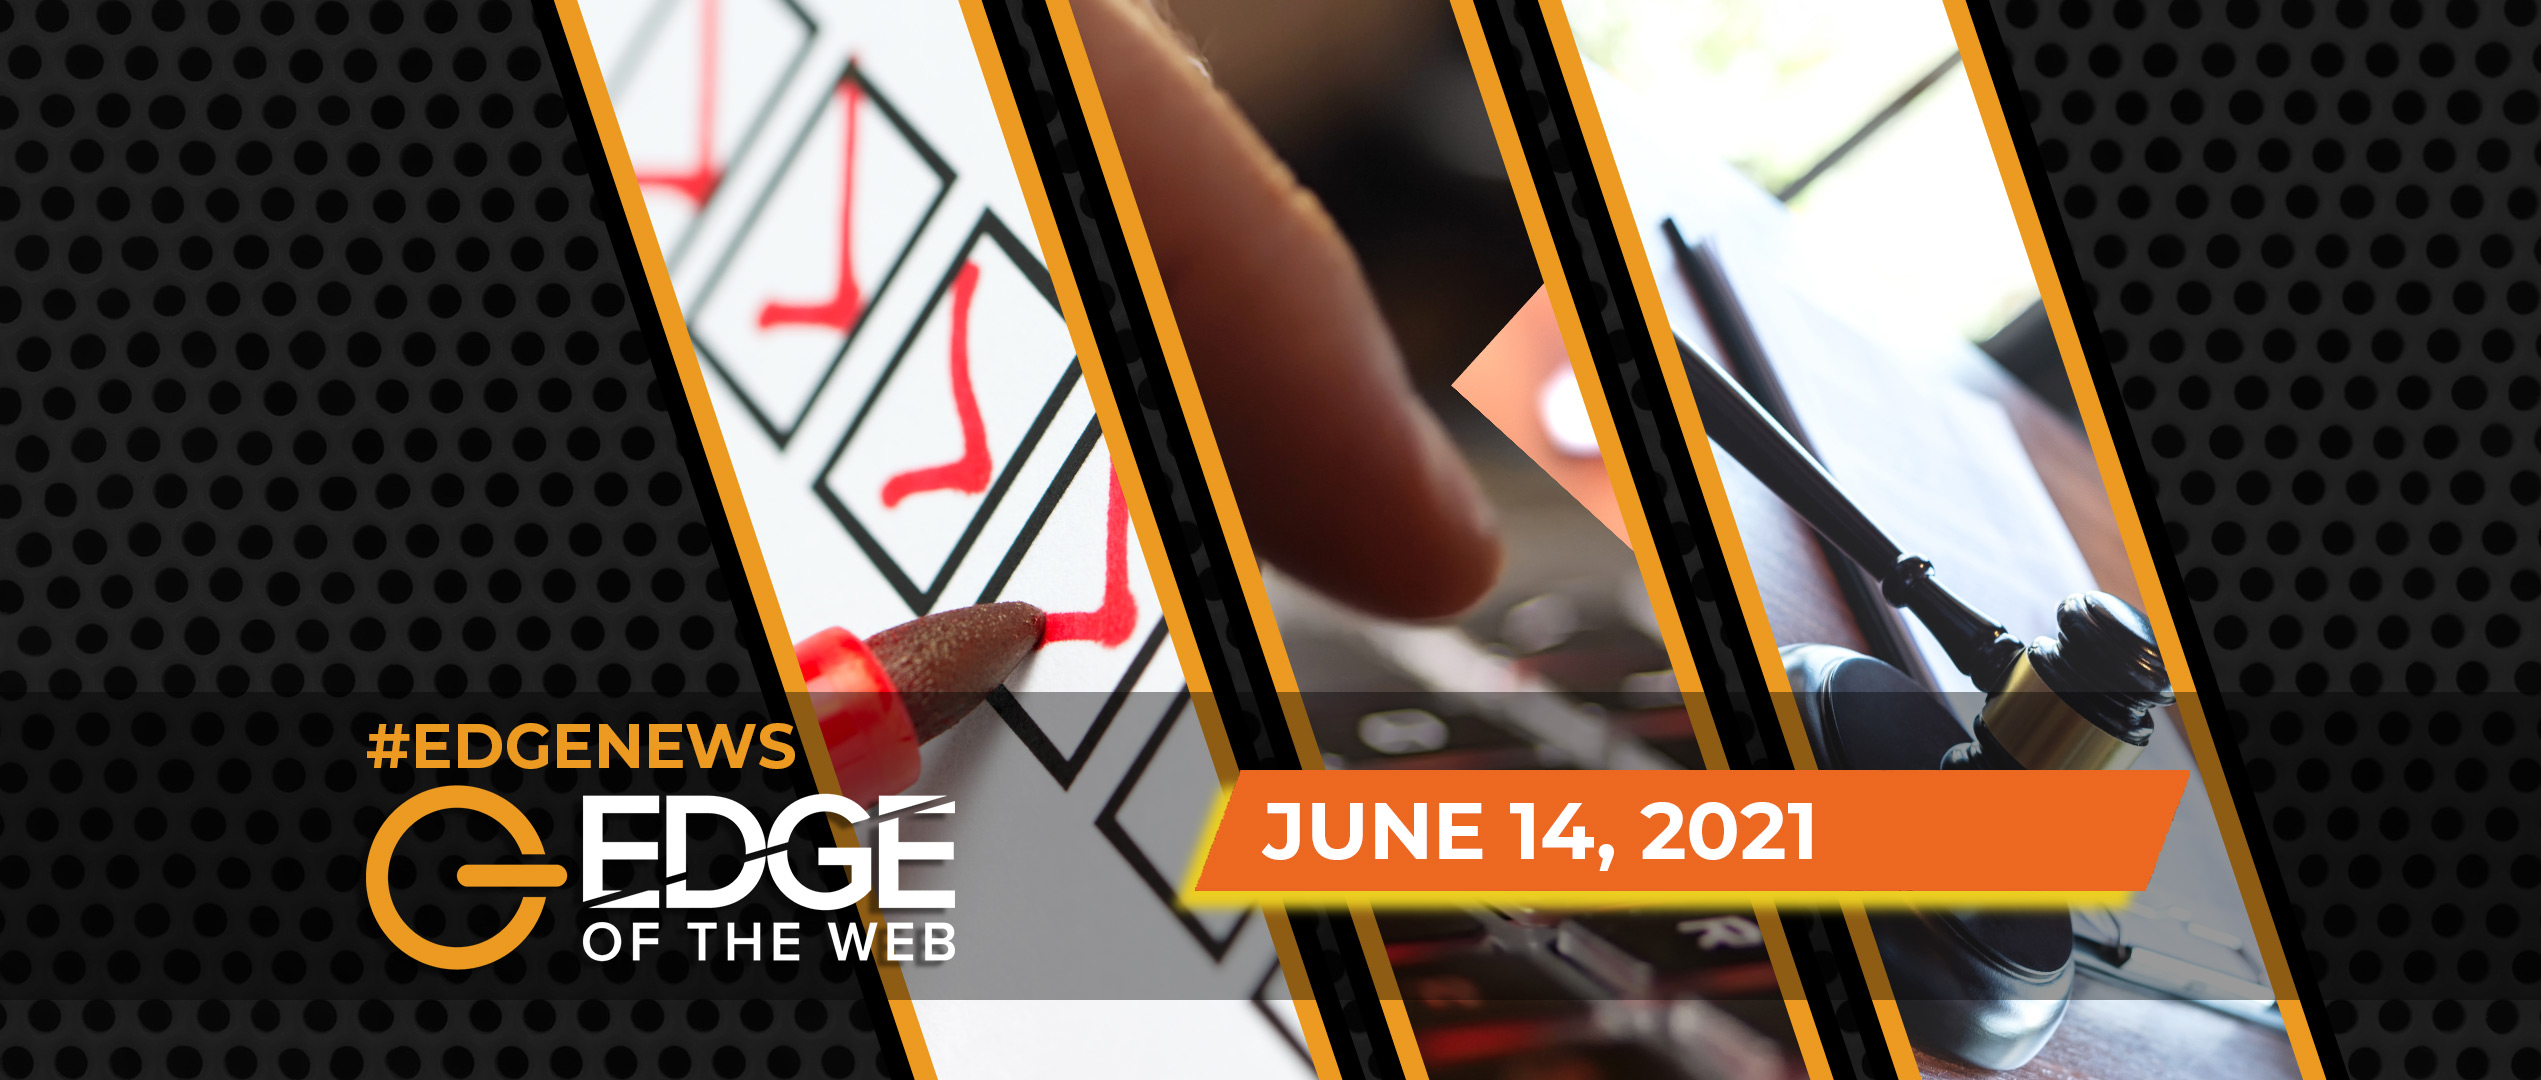 428 | News from the EDGE | Week of 6.14.2021